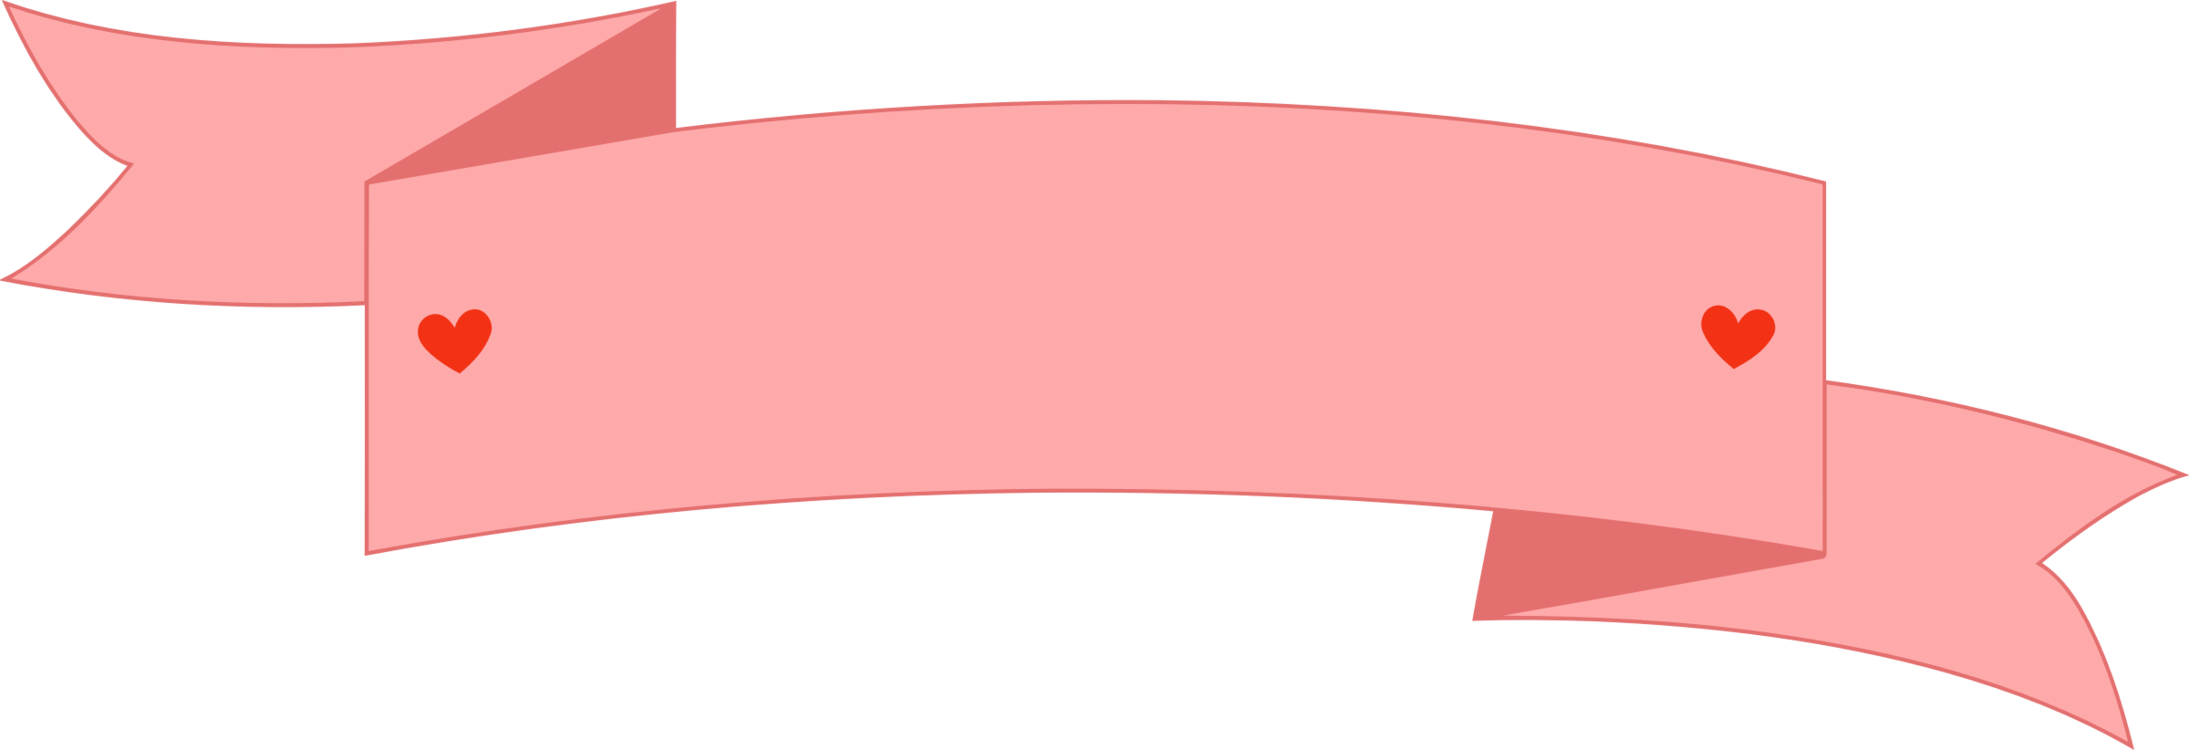 Pink,Arch,Material Property